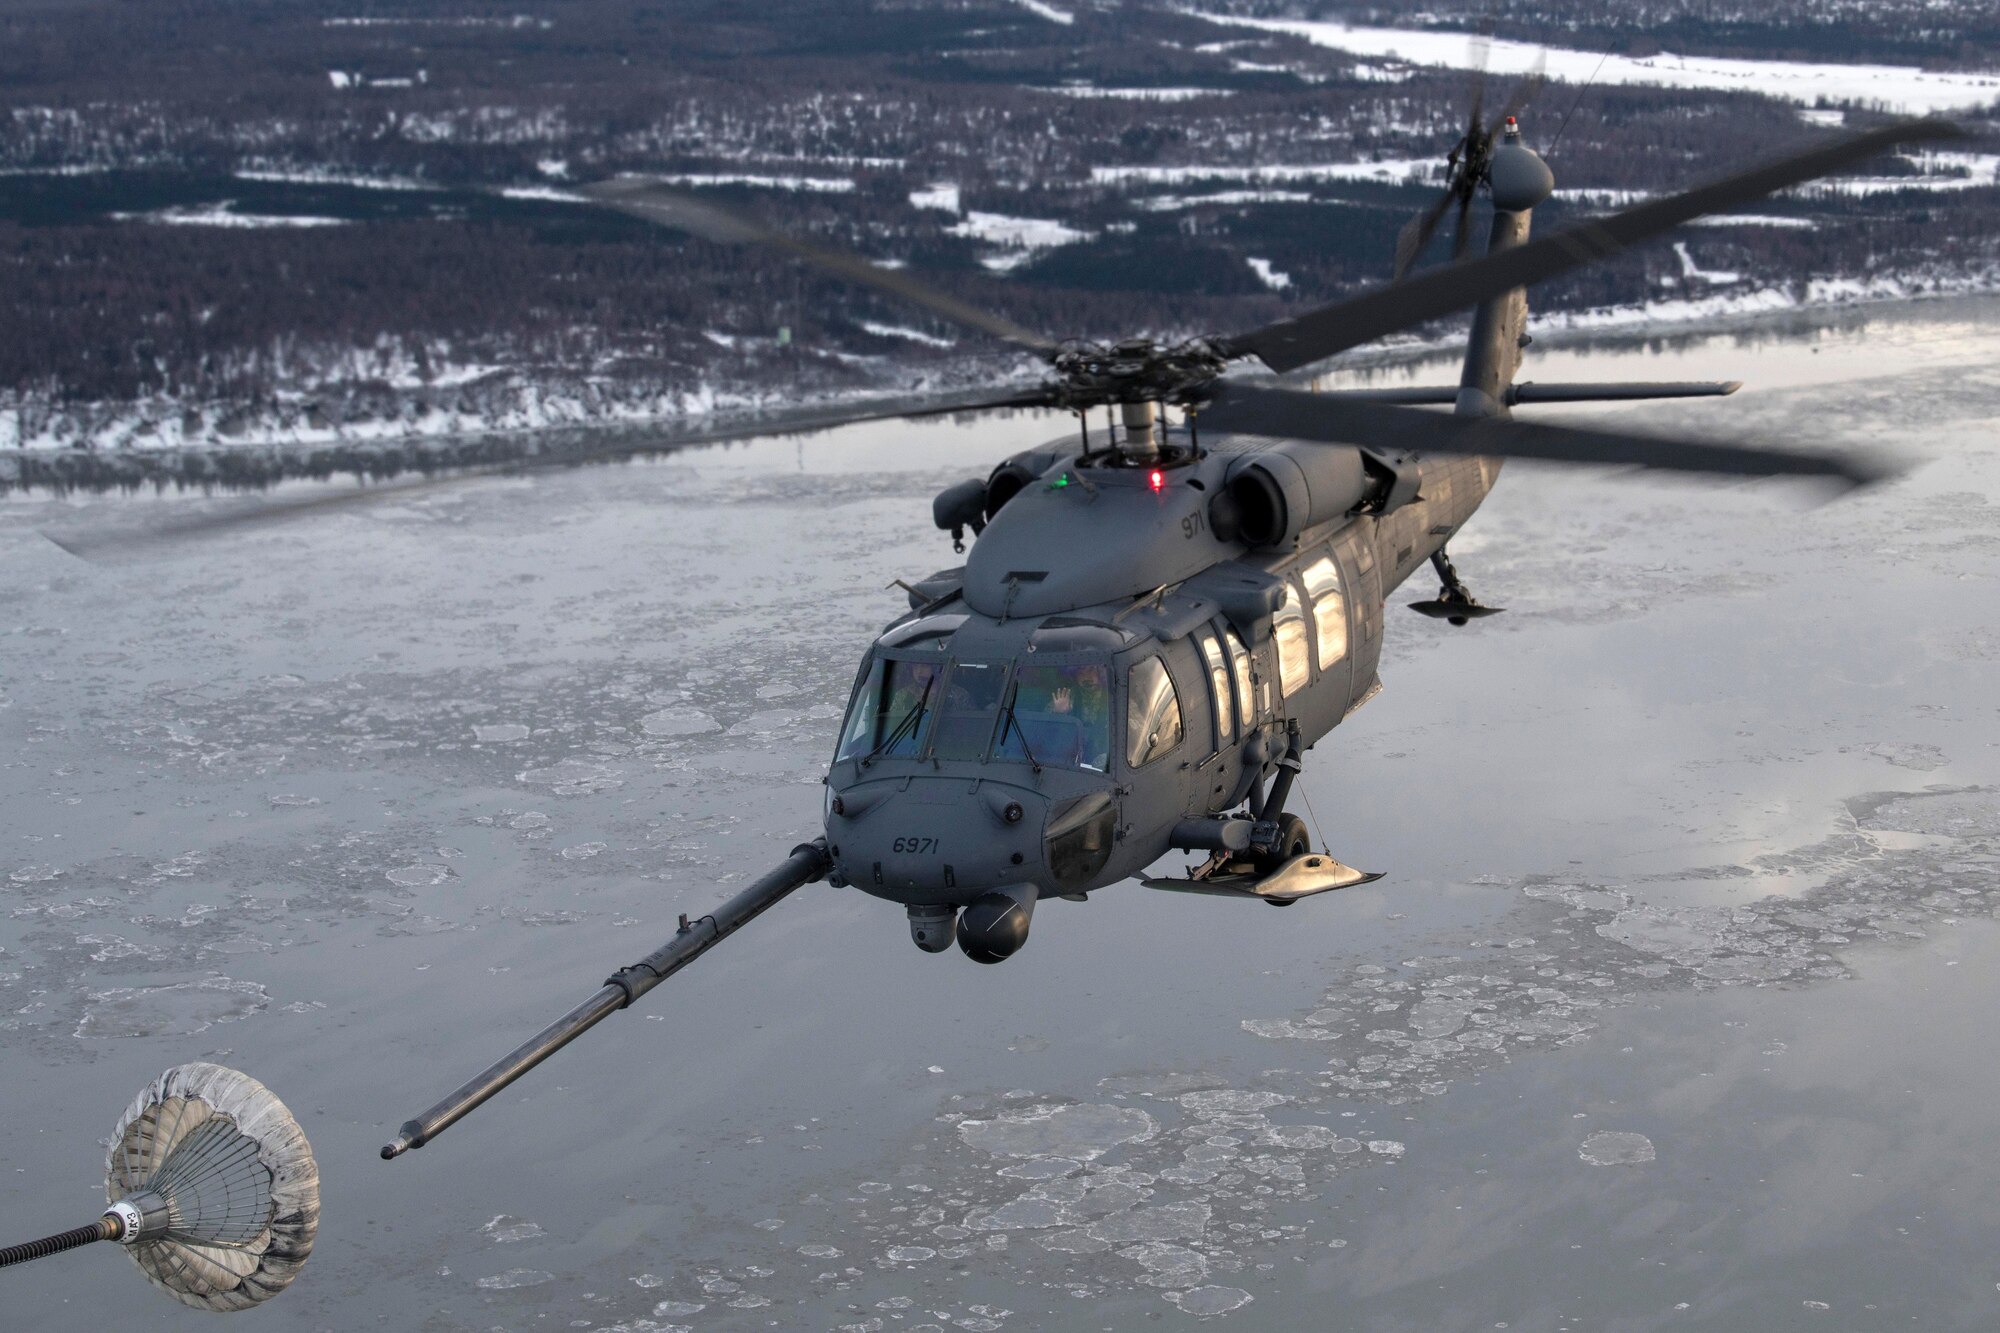 U.S Air Force HH-60 Pave Hawk helicopter assigned to the 210th Rescue Squadron, Alaska Air National Guard, conducts aerial refueling from a U.S. Air Force HC-130J Combat King II assigned to the 211th Rescue Squadron, Alaska Air National Guard, over Alaska, Jan. 21, 2021, during Operation Noble Defender